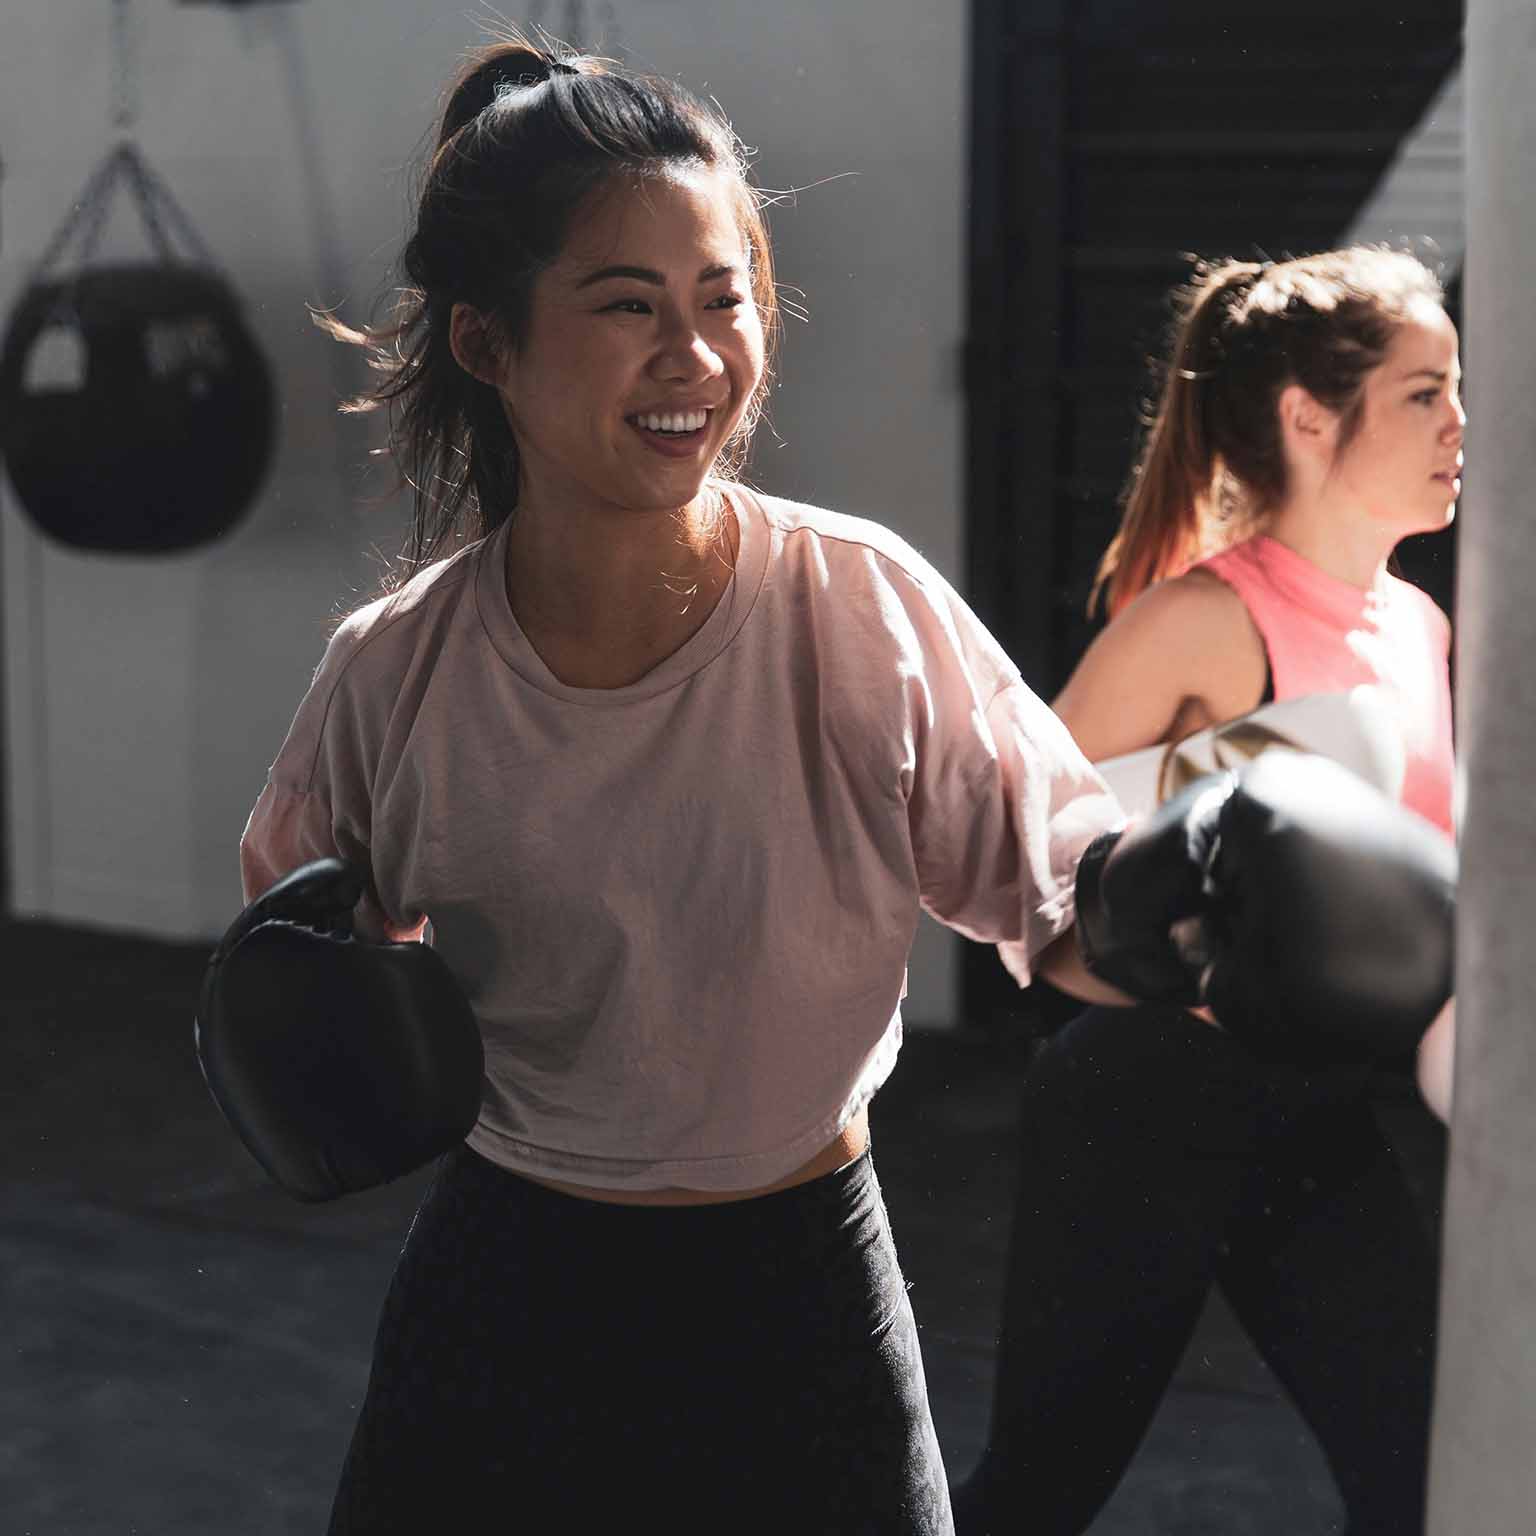 Girl boxing with boxing gloves and smiling